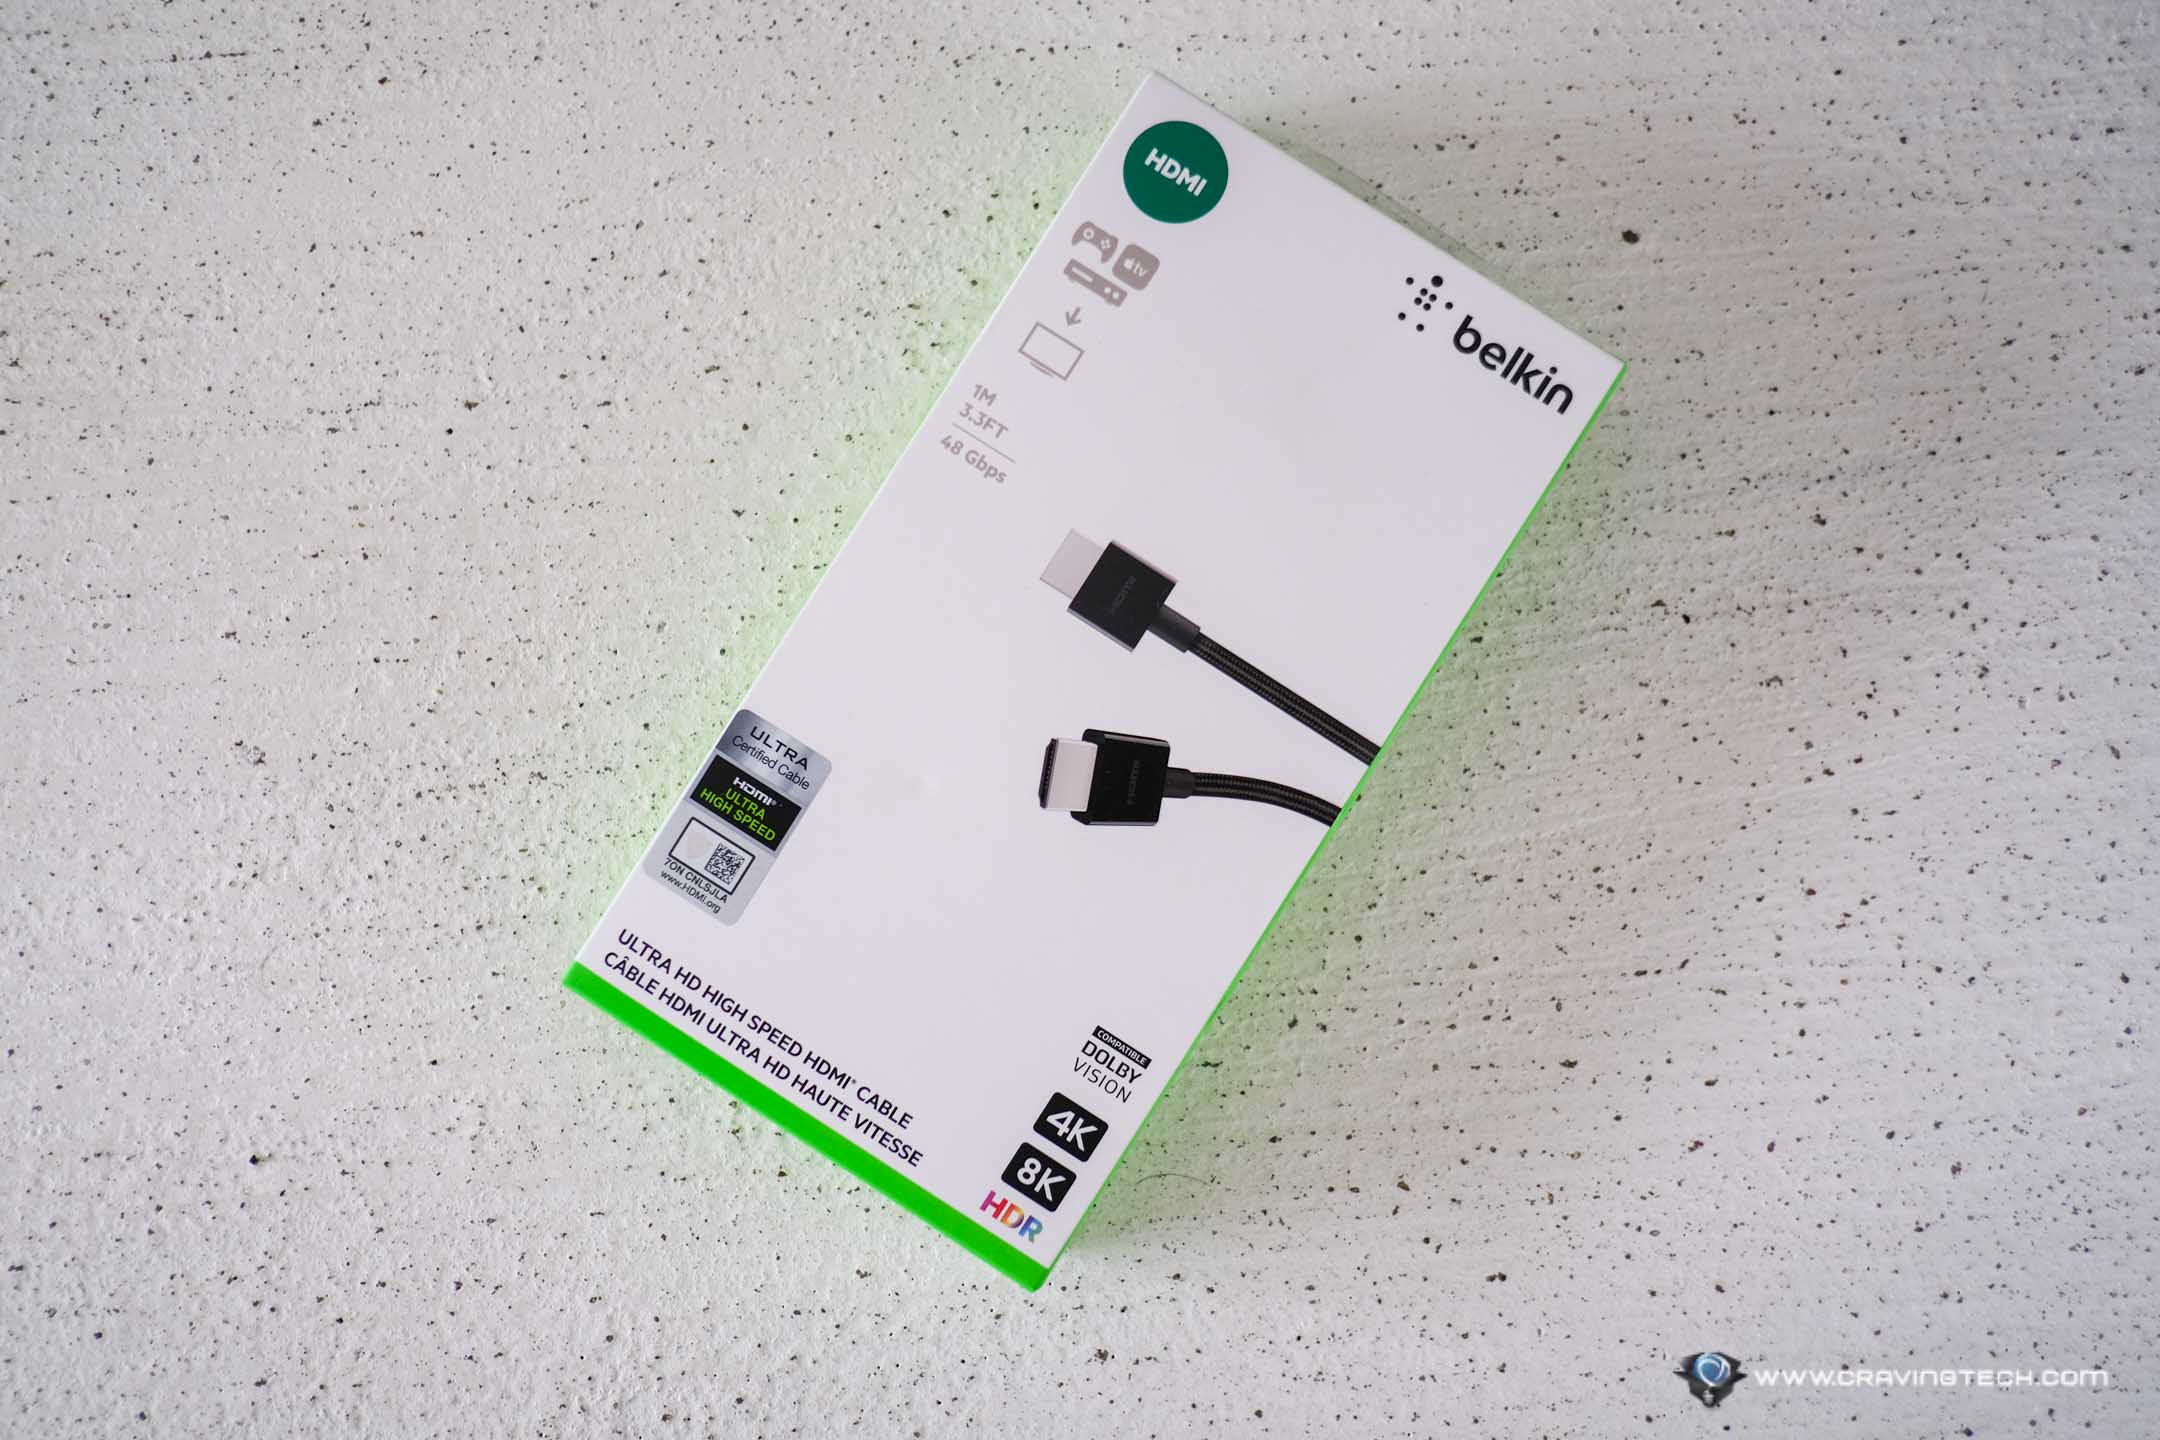 Belkin’s HDMI cables get the Ultra High Speed Certification